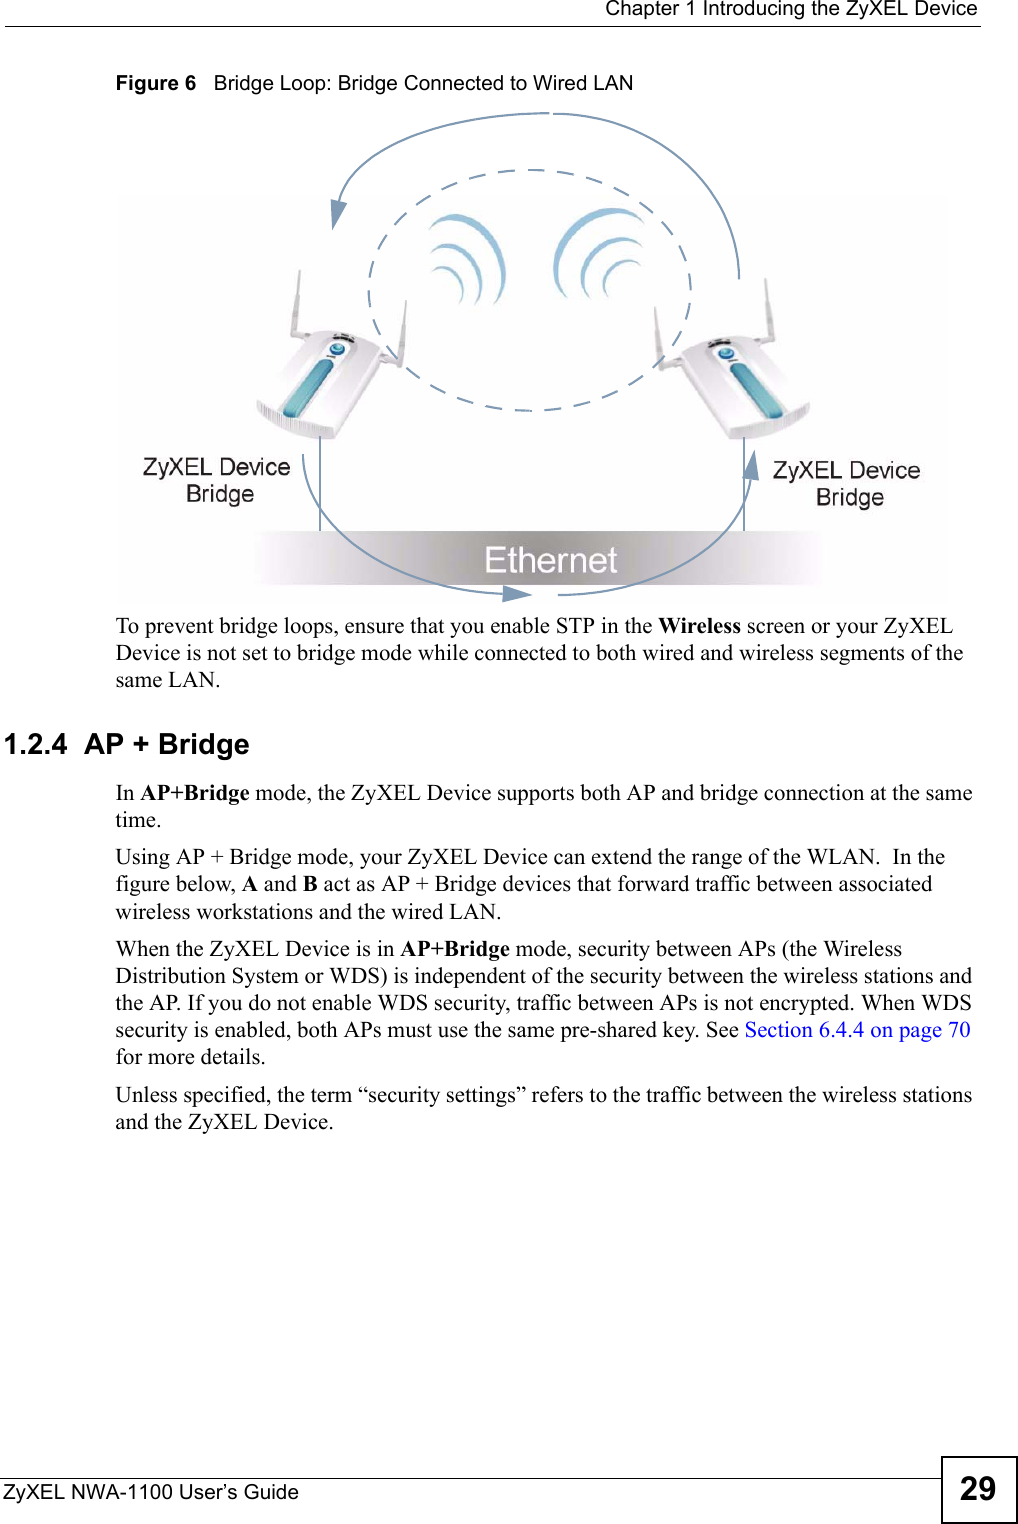  Chapter 1 Introducing the ZyXEL DeviceZyXEL NWA-1100 User’s Guide 29Figure 6   Bridge Loop: Bridge Connected to Wired LANTo prevent bridge loops, ensure that you enable STP in the Wireless screen or your ZyXEL Device is not set to bridge mode while connected to both wired and wireless segments of the same LAN.1.2.4  AP + BridgeIn AP+Bridge mode, the ZyXEL Device supports both AP and bridge connection at the same time.Using AP + Bridge mode, your ZyXEL Device can extend the range of the WLAN.  In the figure below, A and B act as AP + Bridge devices that forward traffic between associated wireless workstations and the wired LAN.When the ZyXEL Device is in AP+Bridge mode, security between APs (the Wireless Distribution System or WDS) is independent of the security between the wireless stations and the AP. If you do not enable WDS security, traffic between APs is not encrypted. When WDS security is enabled, both APs must use the same pre-shared key. See Section 6.4.4 on page 70 for more details.Unless specified, the term “security settings” refers to the traffic between the wireless stations and the ZyXEL Device.